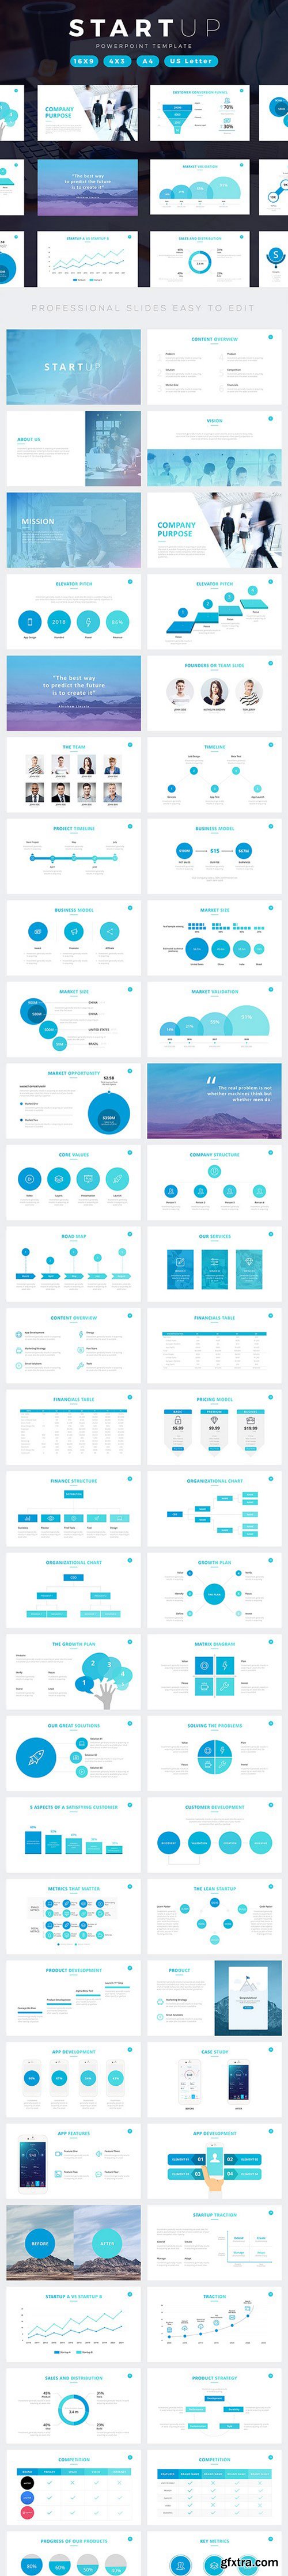 Graphicriver - Startup Company Pitch Deck Powerpoint Template 19276624